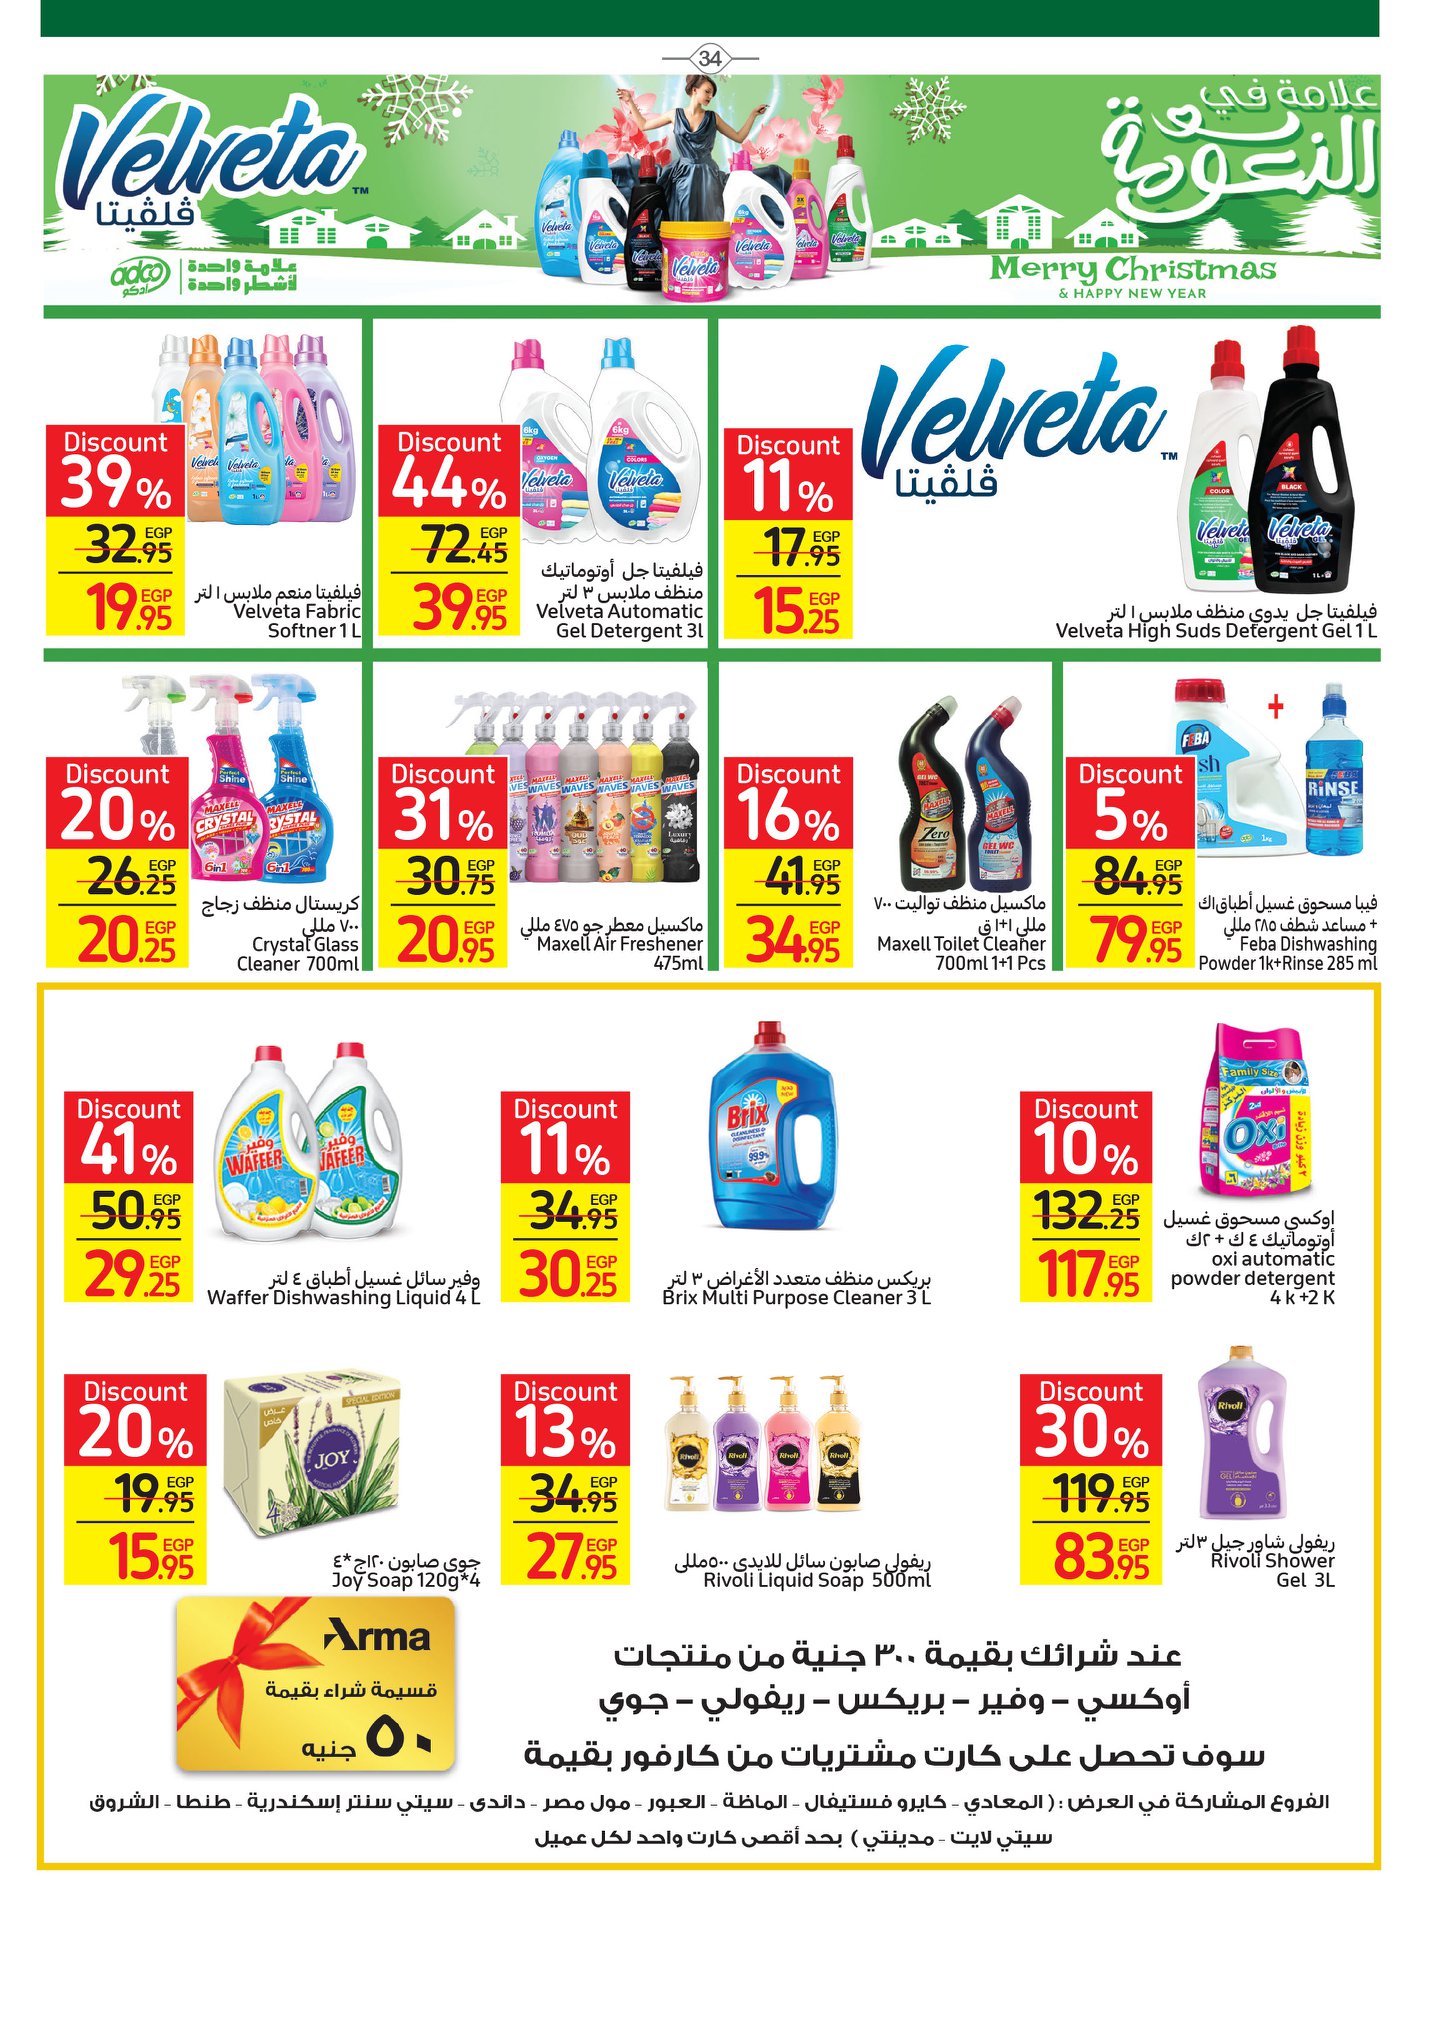 Carrefour magazine offers complete with 50% discounts and a surprise purchase in convenient installments without interest 39